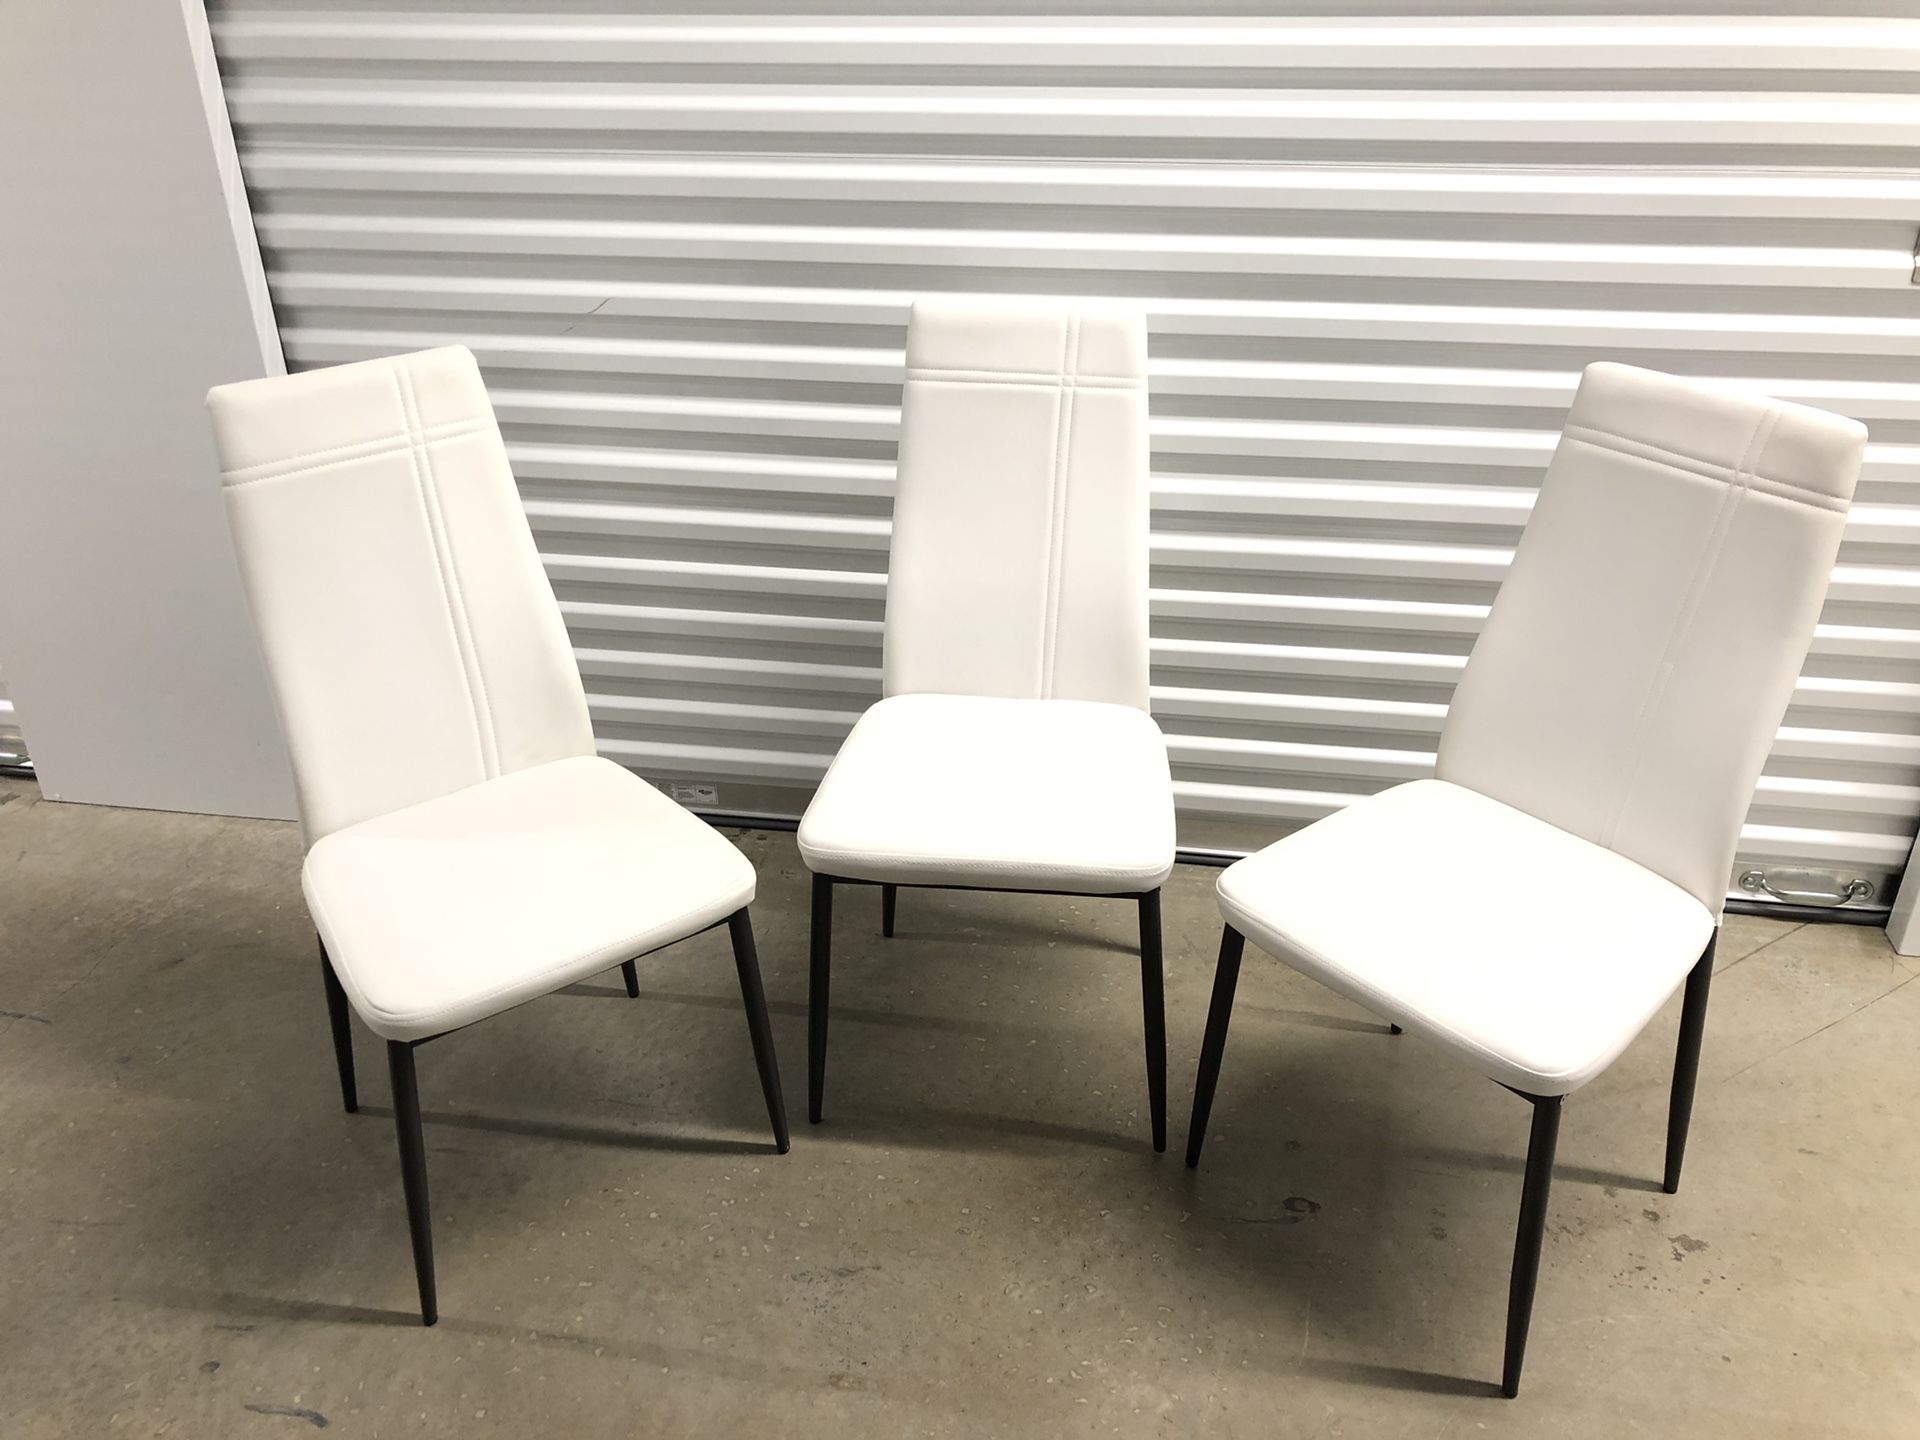 Dining Chair(s) x 3